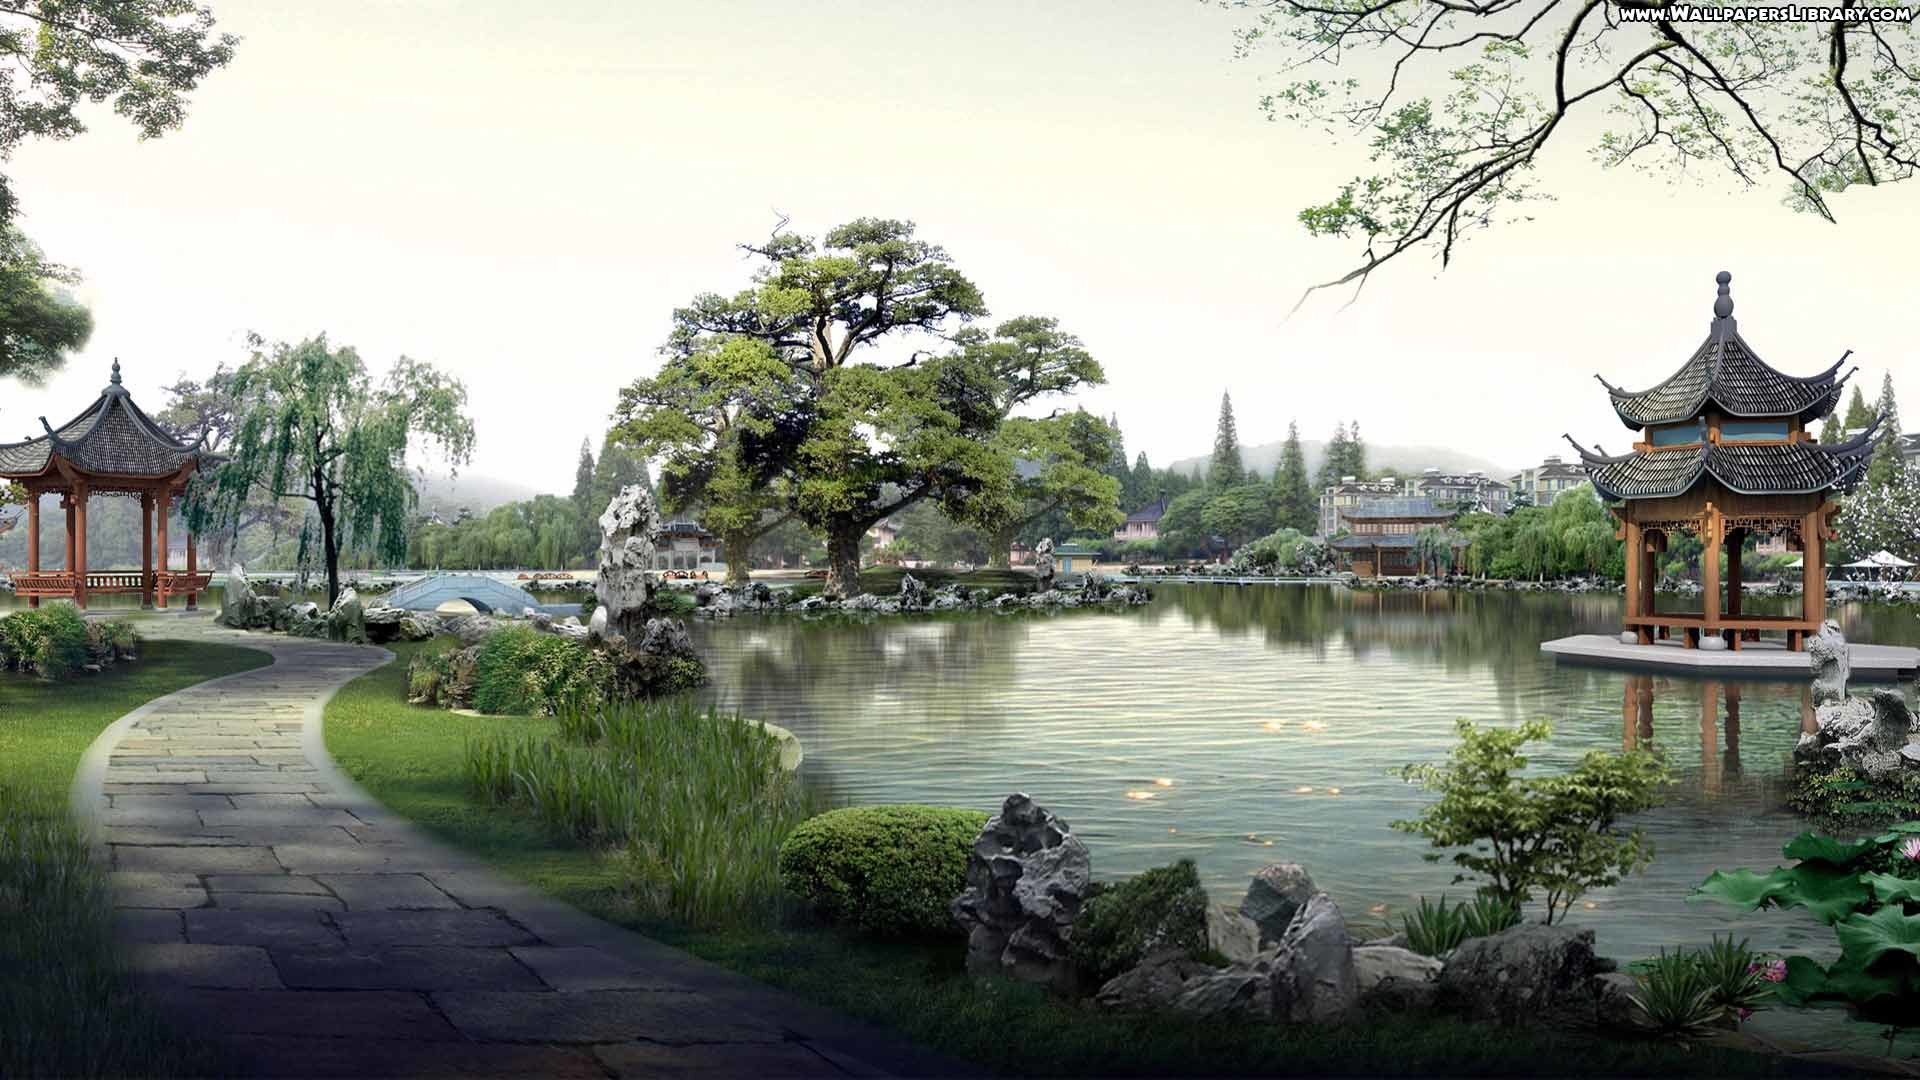 1920x1080 Search Results for “japanese landscape art wallpaper” – Adorable Wallpapers